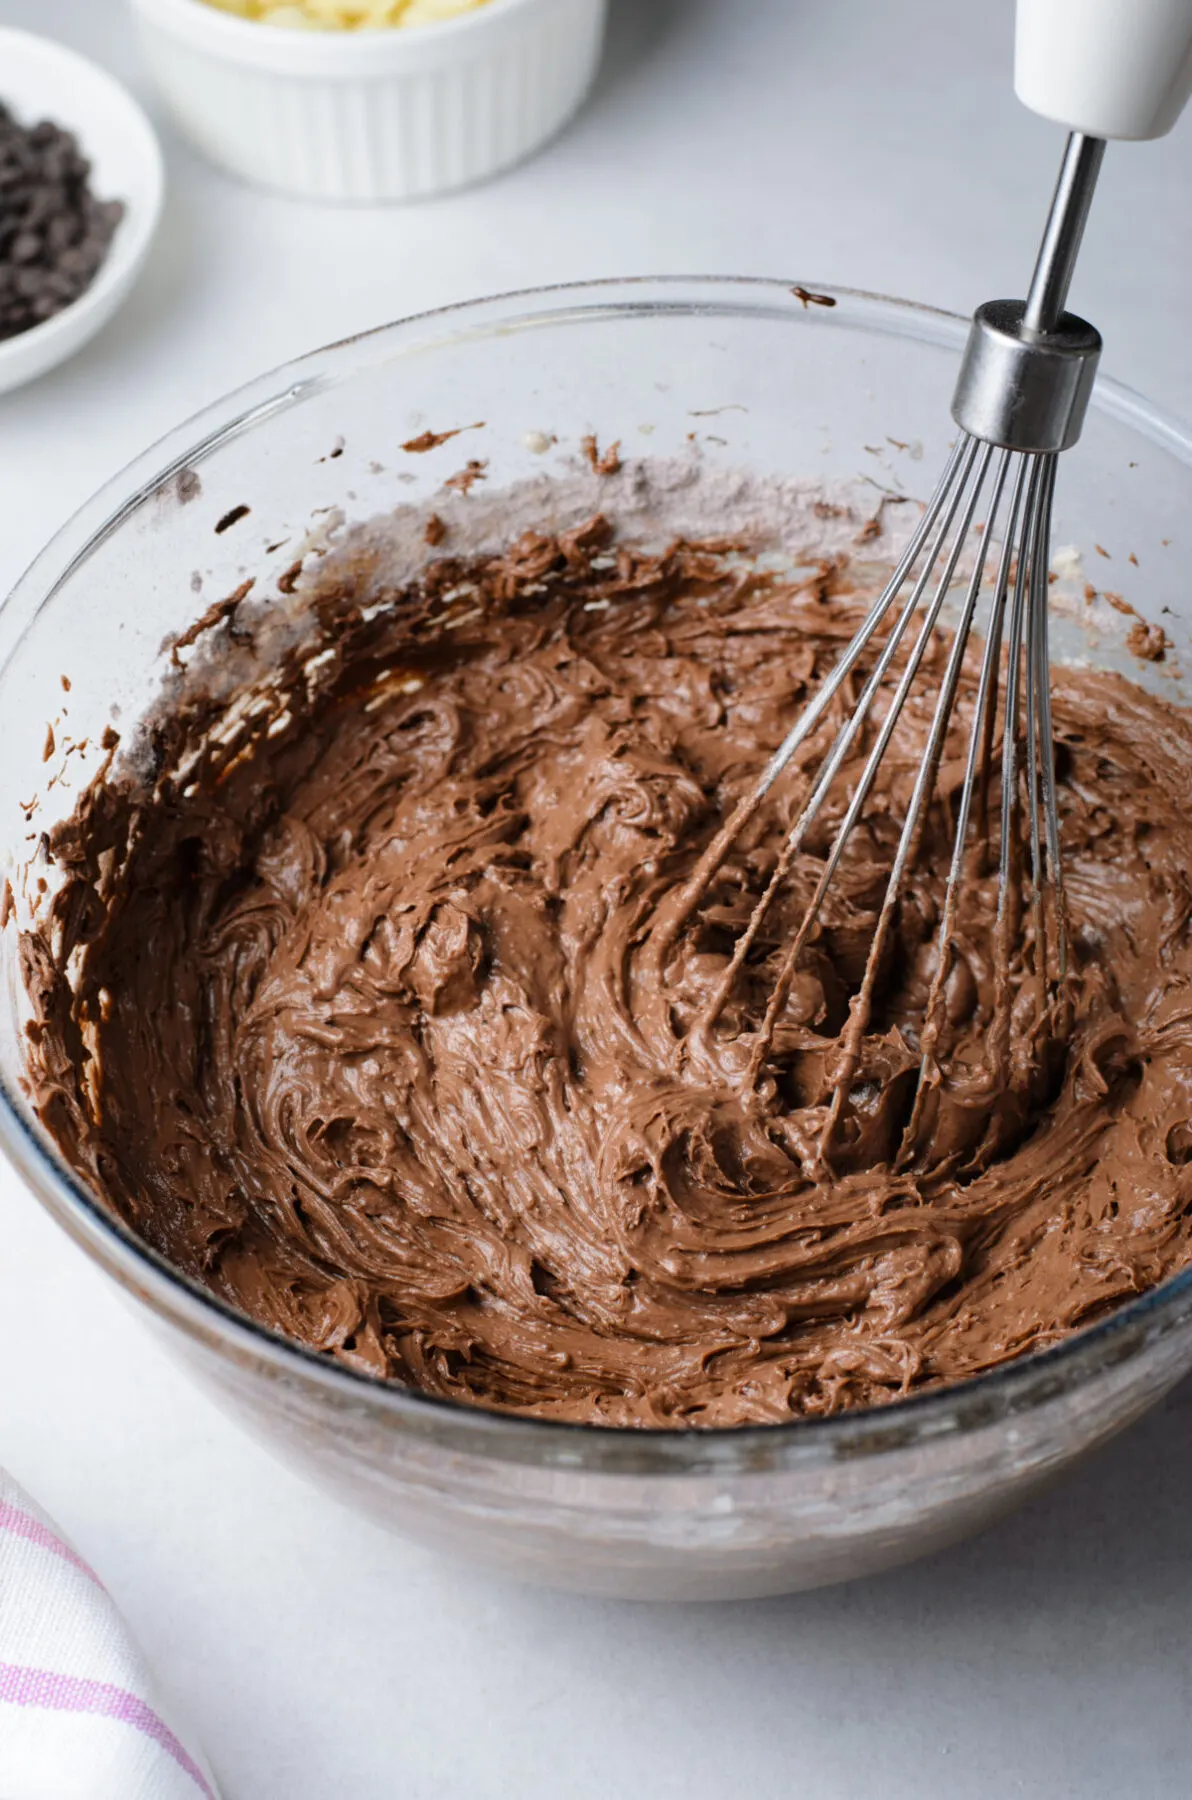 Brownies batter being mixed